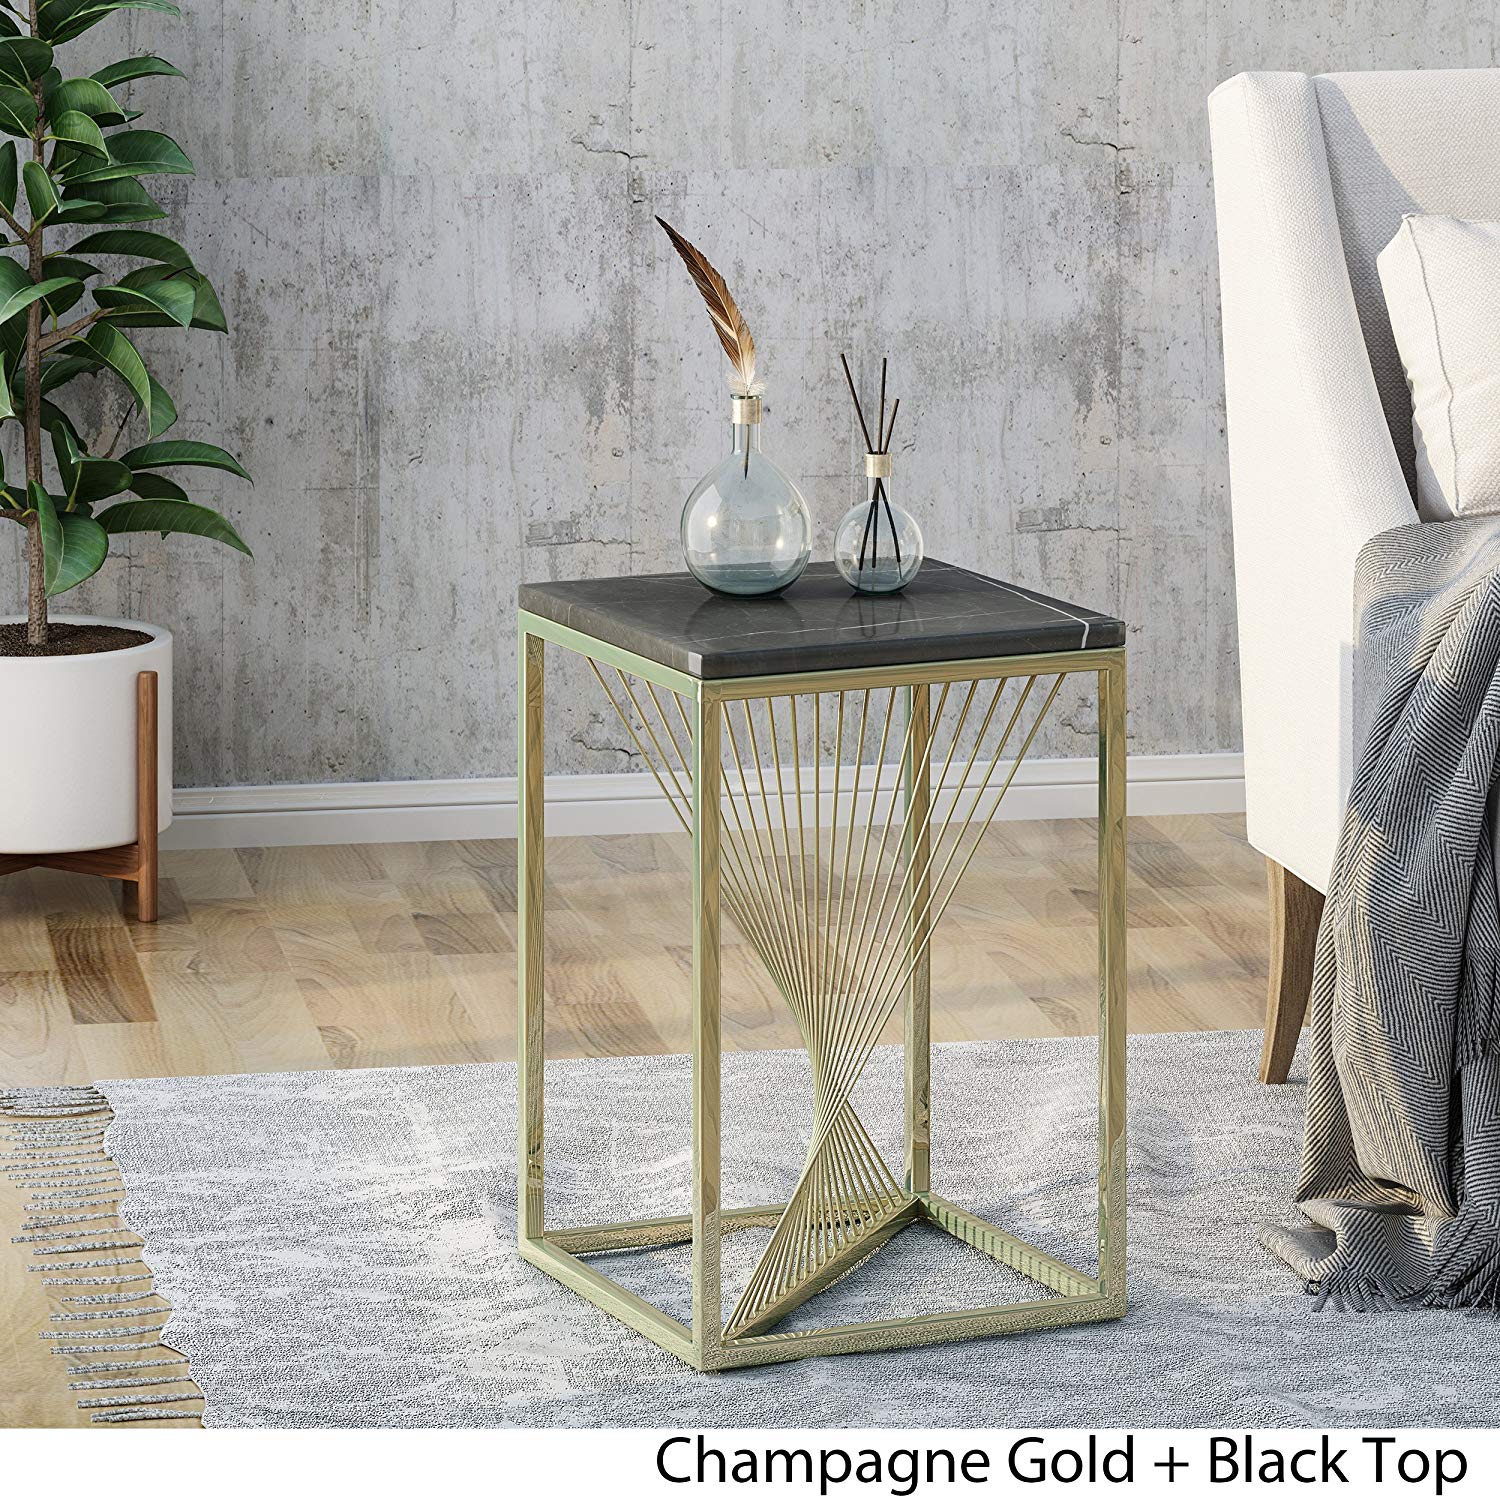 oliver modern faux marble accent table black kitchen dining retro console home decoration design white with shelf grey room chairs small furniture gloss coffee high round bar gold